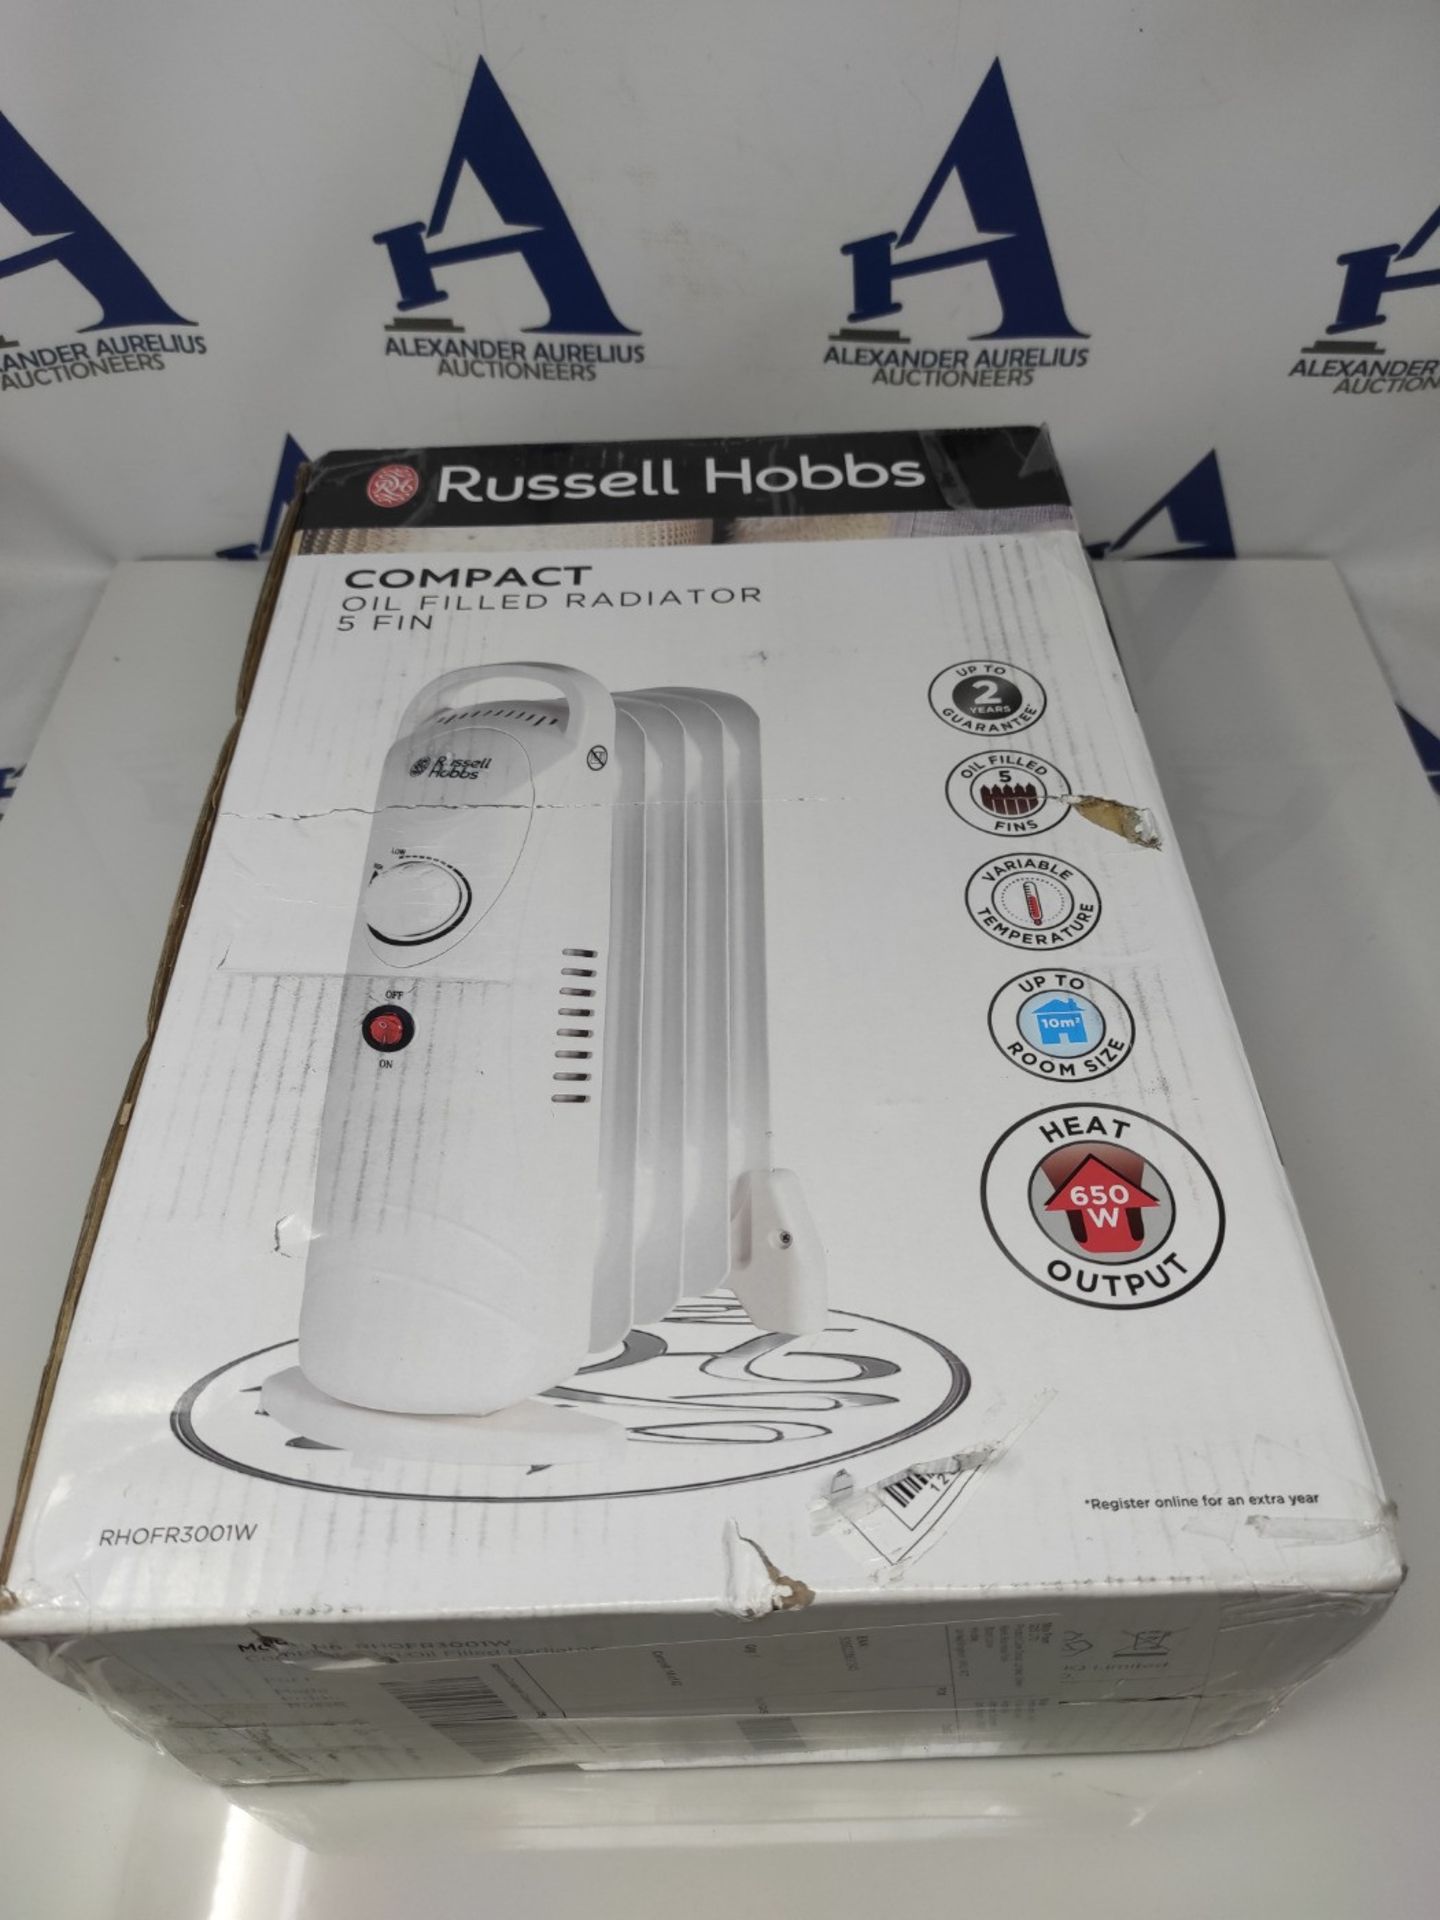 Russell Hobbs 650W Oil Filled Radiator, 5 Fin Portable Electric Heater - White, Adjust - Image 3 of 3